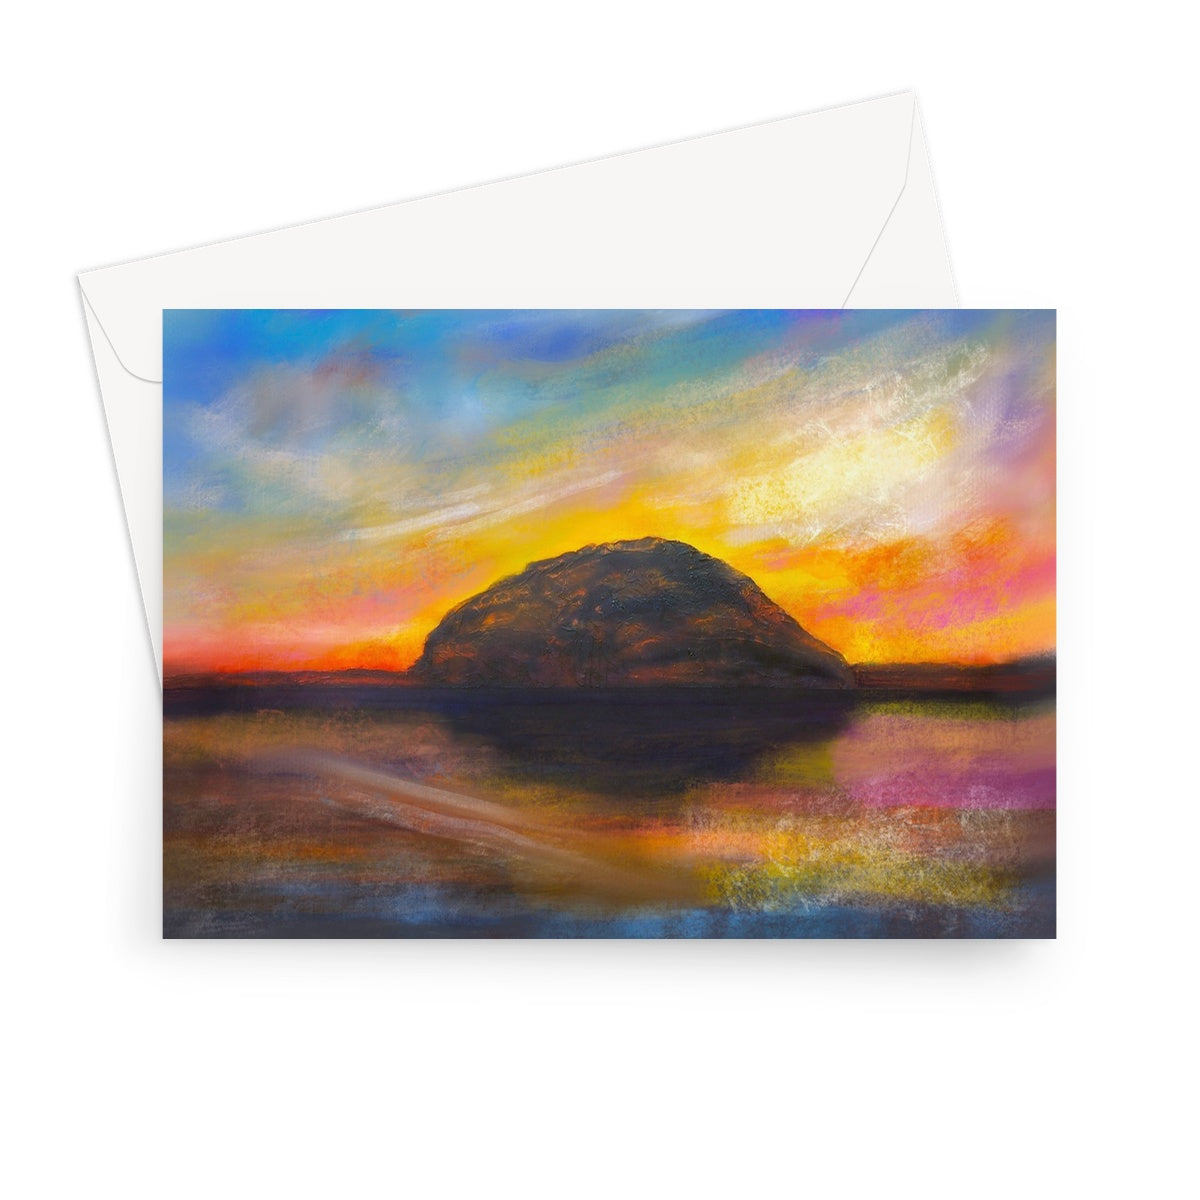 Ailsa Craig Dusk Arran Art Gifts Greeting Card-Greetings Cards-Arran Art Gallery-7"x5"-1 Card-Paintings, Prints, Homeware, Art Gifts From Scotland By Scottish Artist Kevin Hunter